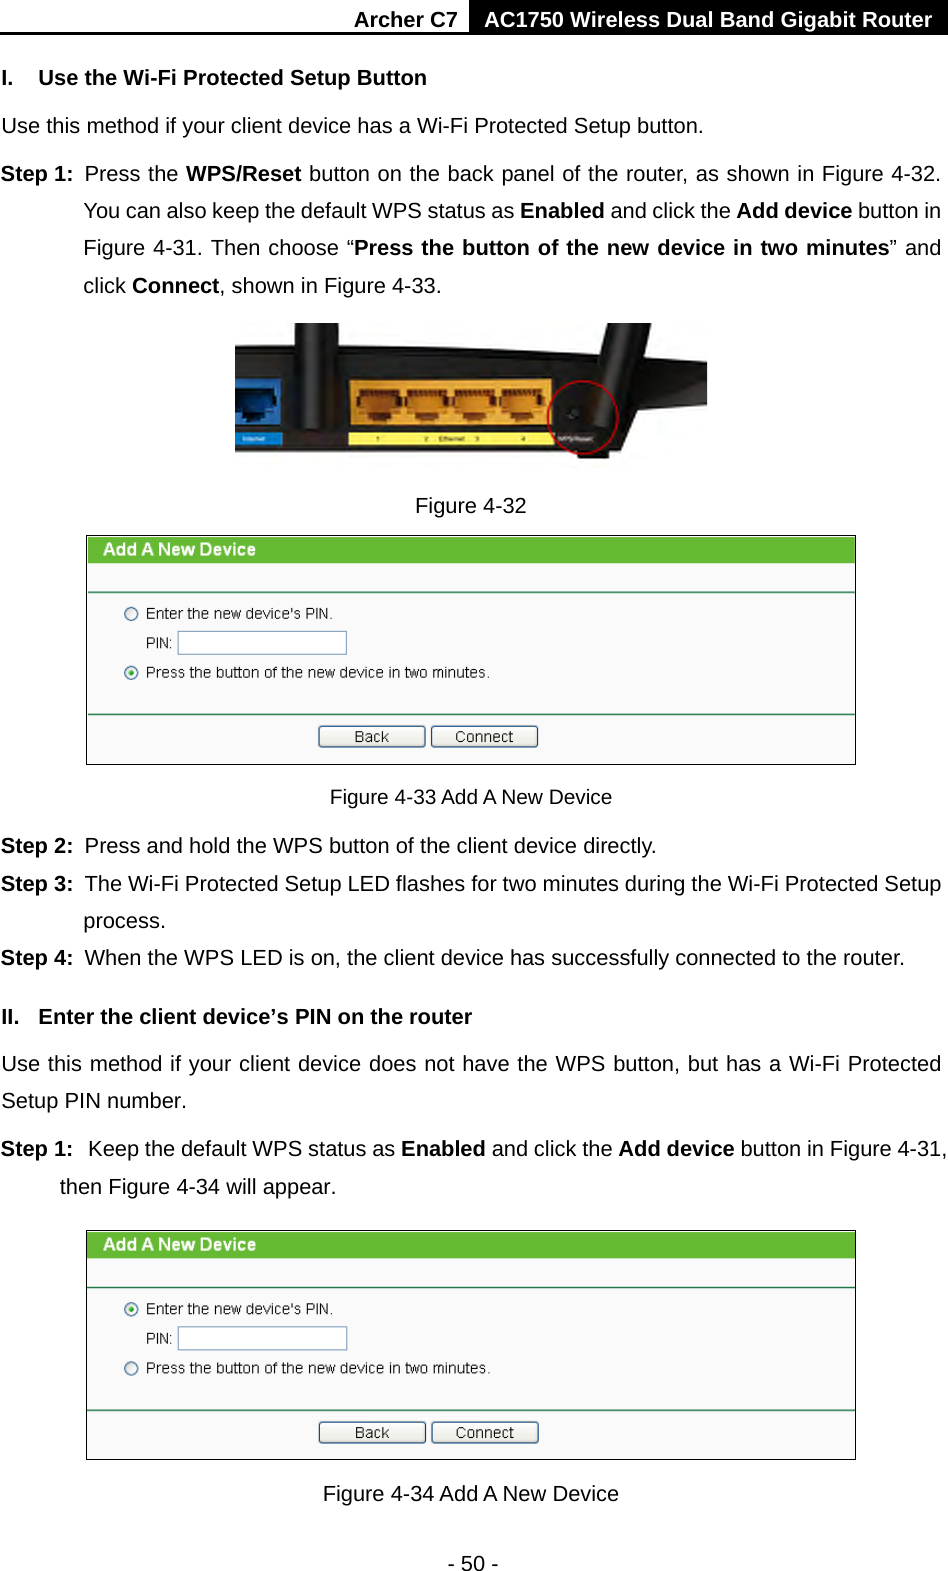 Archer C7 AC1750 Wireless Dual Band Gigabit Router  - 50 - I. Use the Wi-Fi Protected Setup Button Use this method if your client device has a Wi-Fi Protected Setup button. Step 1: Press the WPS/Reset button on the back panel of the router, as shown in Figure 4-32. You can also keep the default WPS status as Enabled and click the Add device button in Figure 4-31. Then choose “Press the button of the new device in two minutes” and click Connect, shown in Figure 4-33.  Figure 4-32  Figure 4-33 Add A New Device Step 2: Press and hold the WPS button of the client device directly.   Step 3: The Wi-Fi Protected Setup LED flashes for two minutes during the Wi-Fi Protected Setup process.   Step 4: When the WPS LED is on, the client device has successfully connected to the router.   II. Enter the client device’s PIN on the router Use this method if your client device does not have the WPS button, but has a Wi-Fi Protected Setup PIN number. Step 1: Keep the default WPS status as Enabled and click the Add device button in Figure 4-31, then Figure 4-34 will appear.    Figure 4-34 Add A New Device 